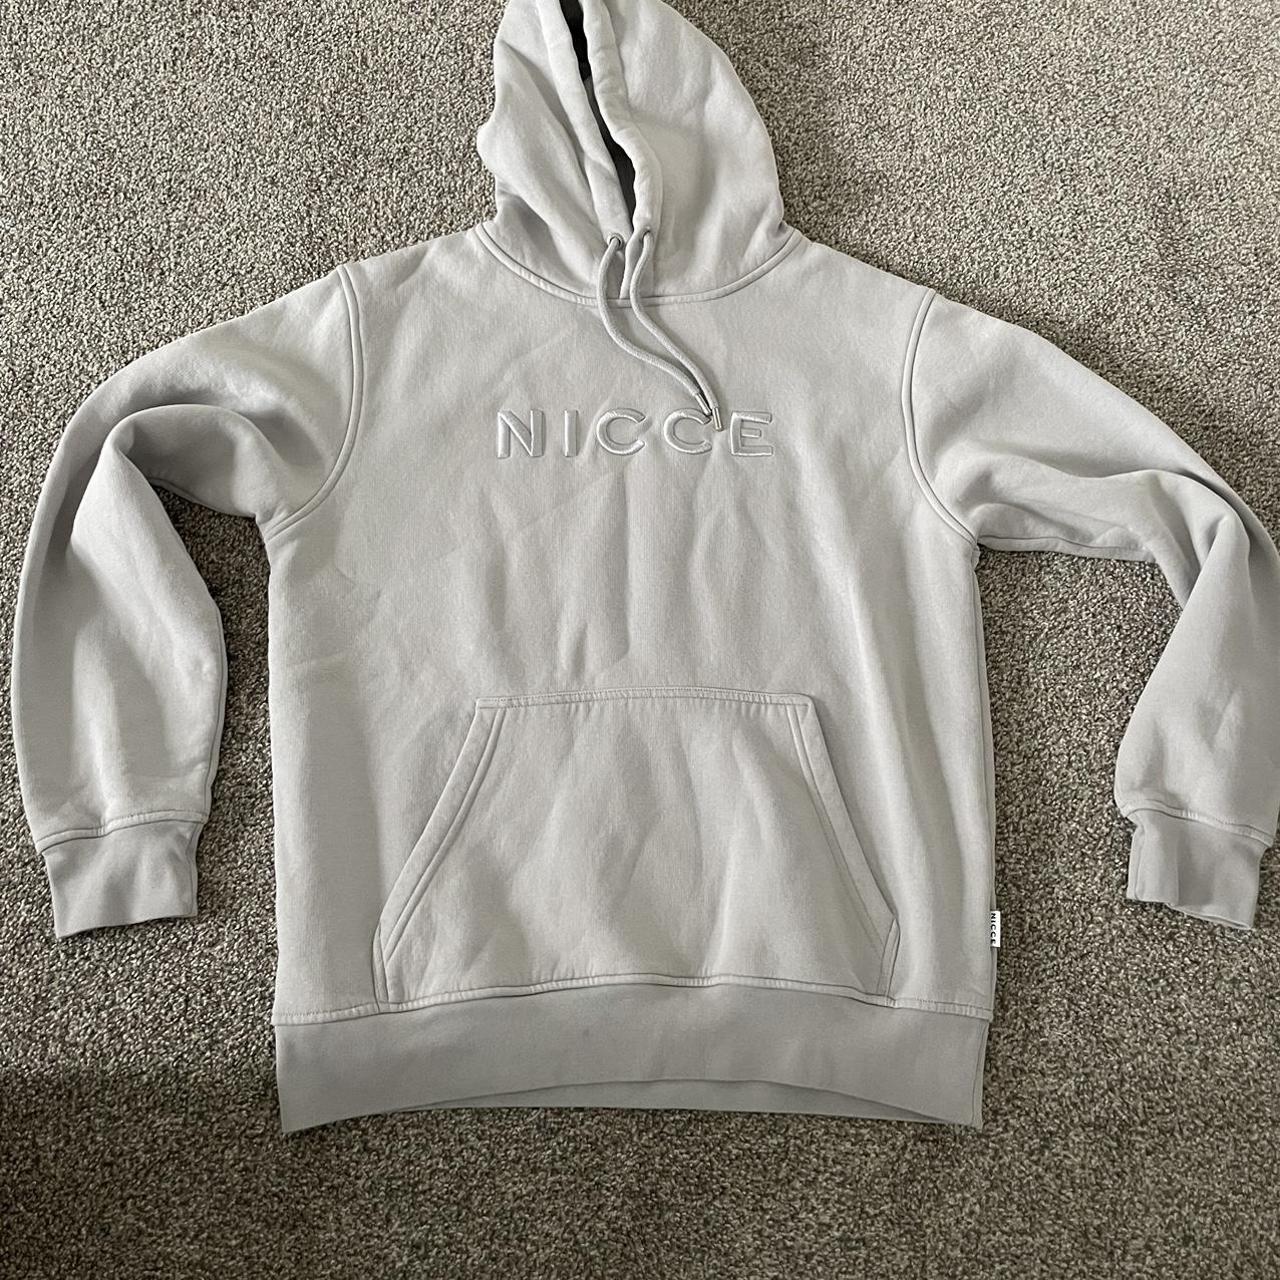 Product Image 1 - Nicce Hoodie
Super soft worn a